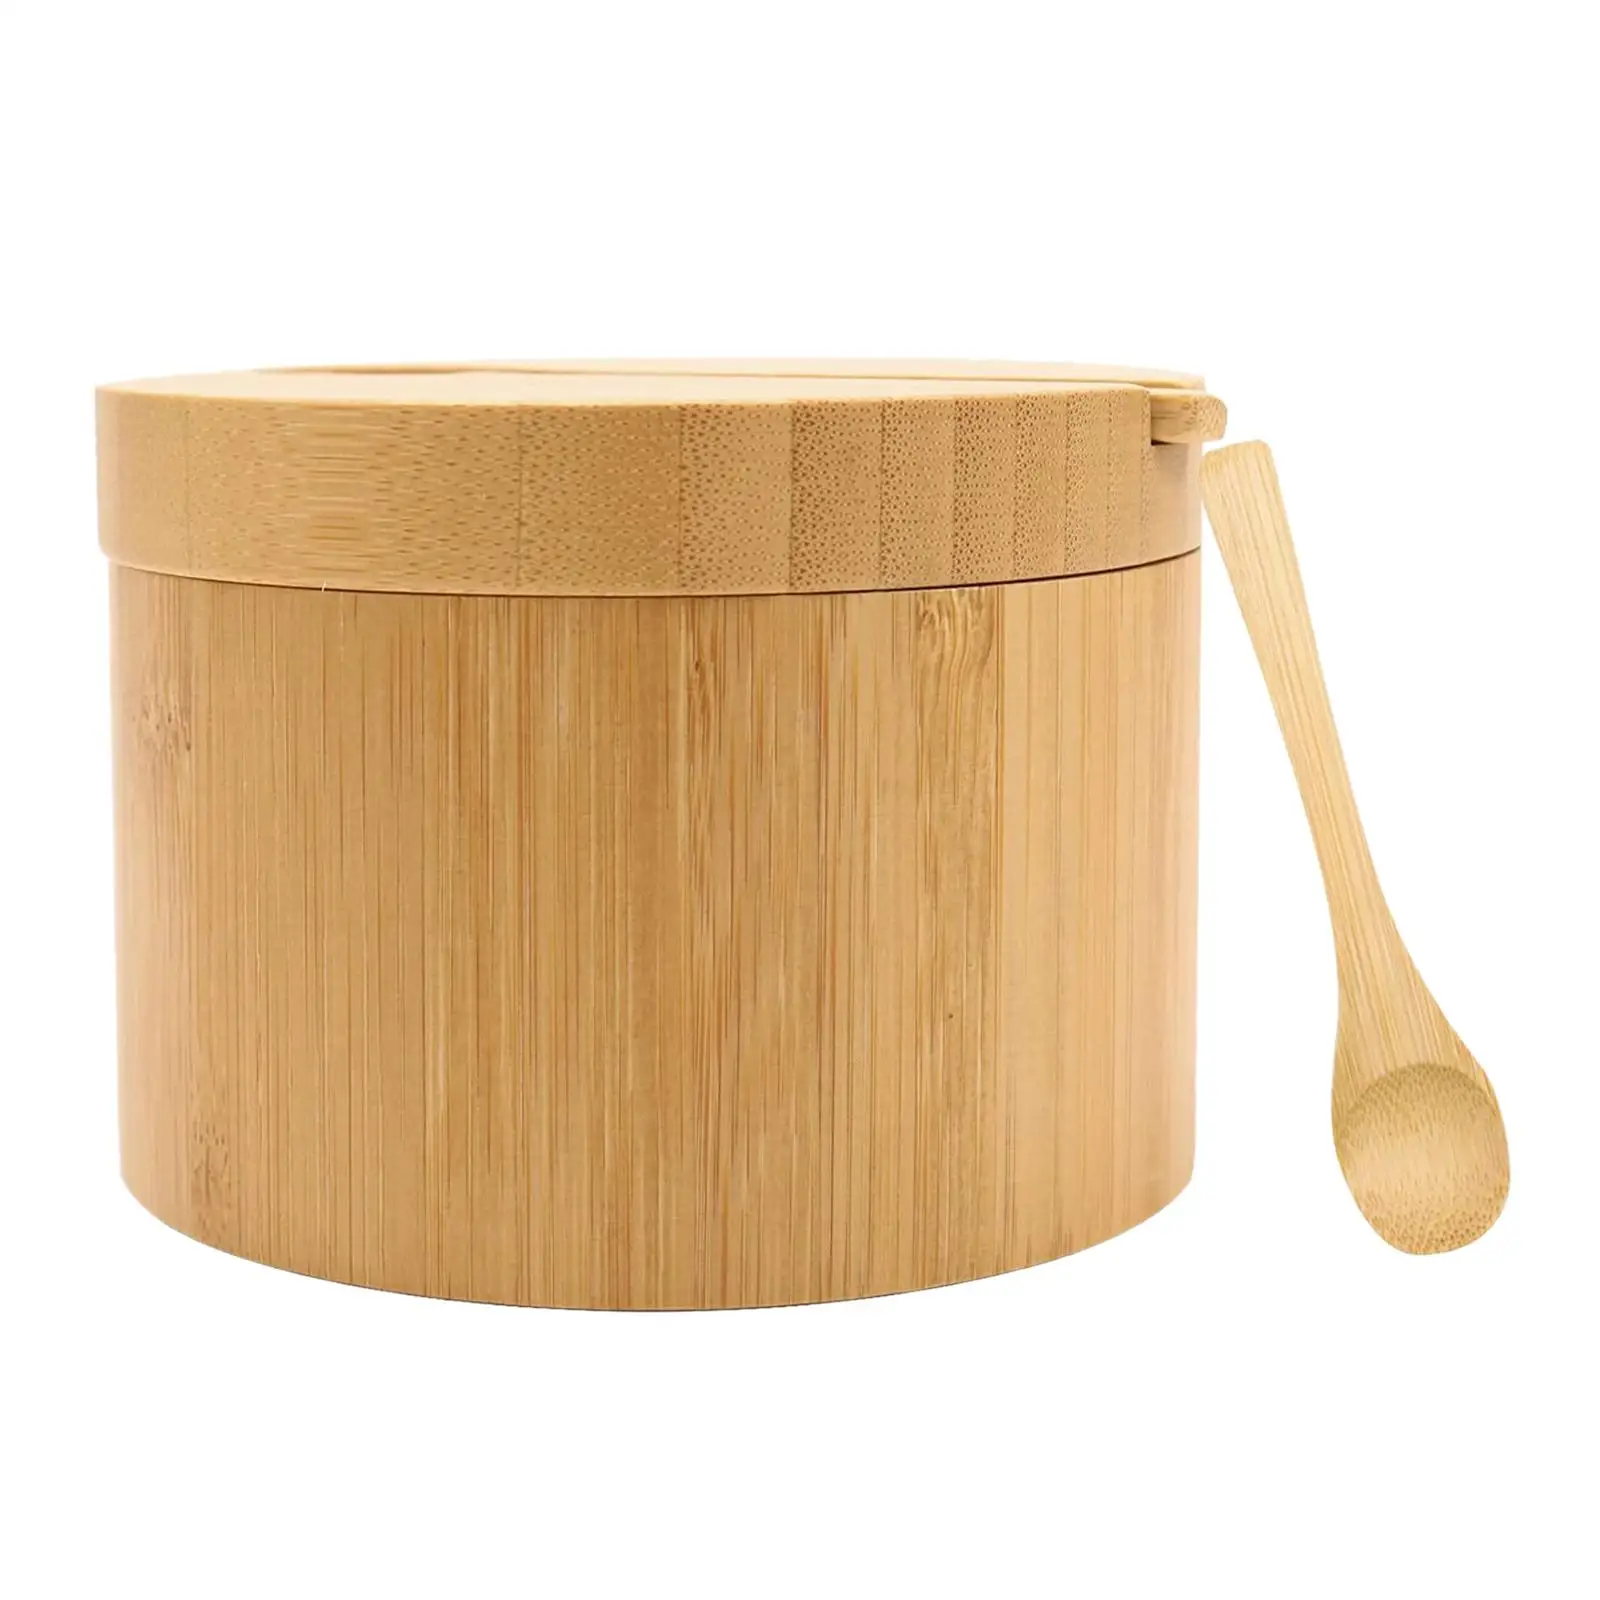 Wood Box for Spices with Magnetic Lid and Spoon Cylinder Spices Holder Desk Office Storage for Tea Salt Kitchen Countertop